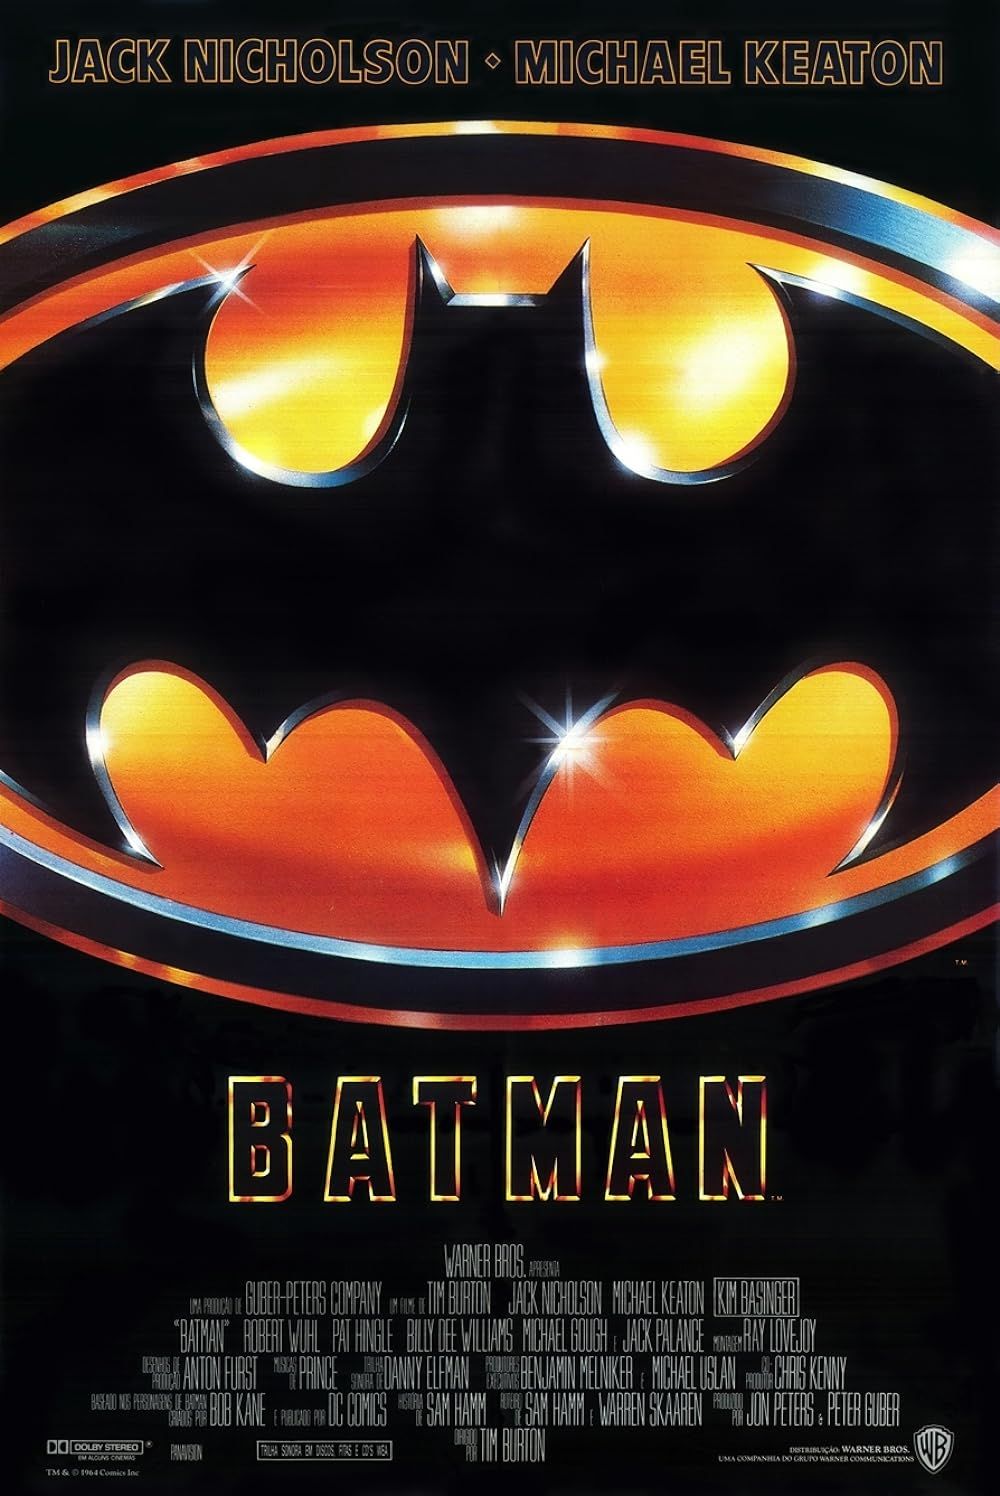 The movie poster for Batman (1989) featuring the classic black and yellow Batman symbol